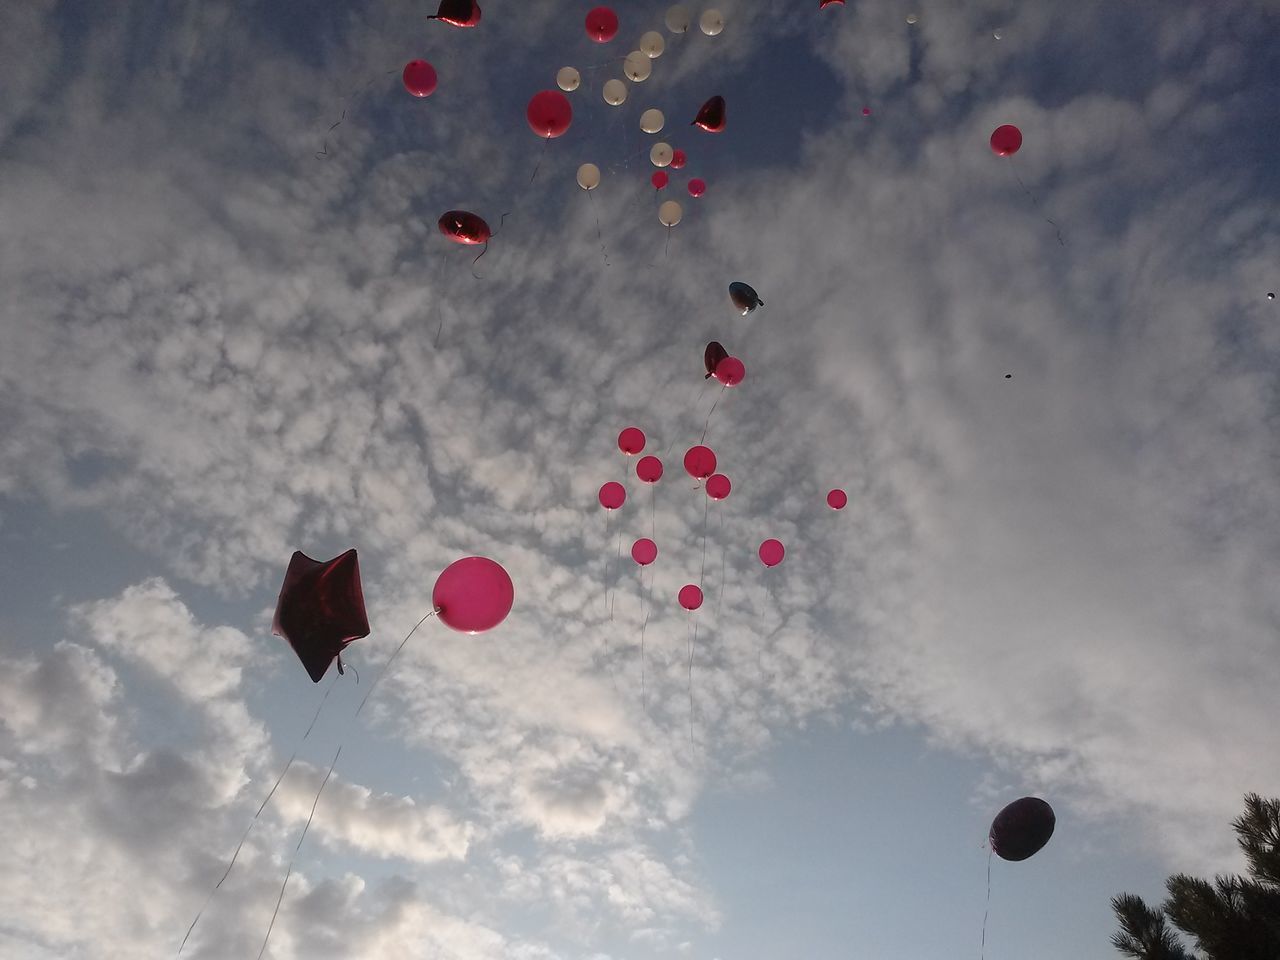 low angle view, mid-air, sky, flying, balloon, cloud - sky, hot air balloon, multi colored, celebration, cloud, cloudy, parachute, red, outdoors, nature, blue, no people, adventure, day, colorful